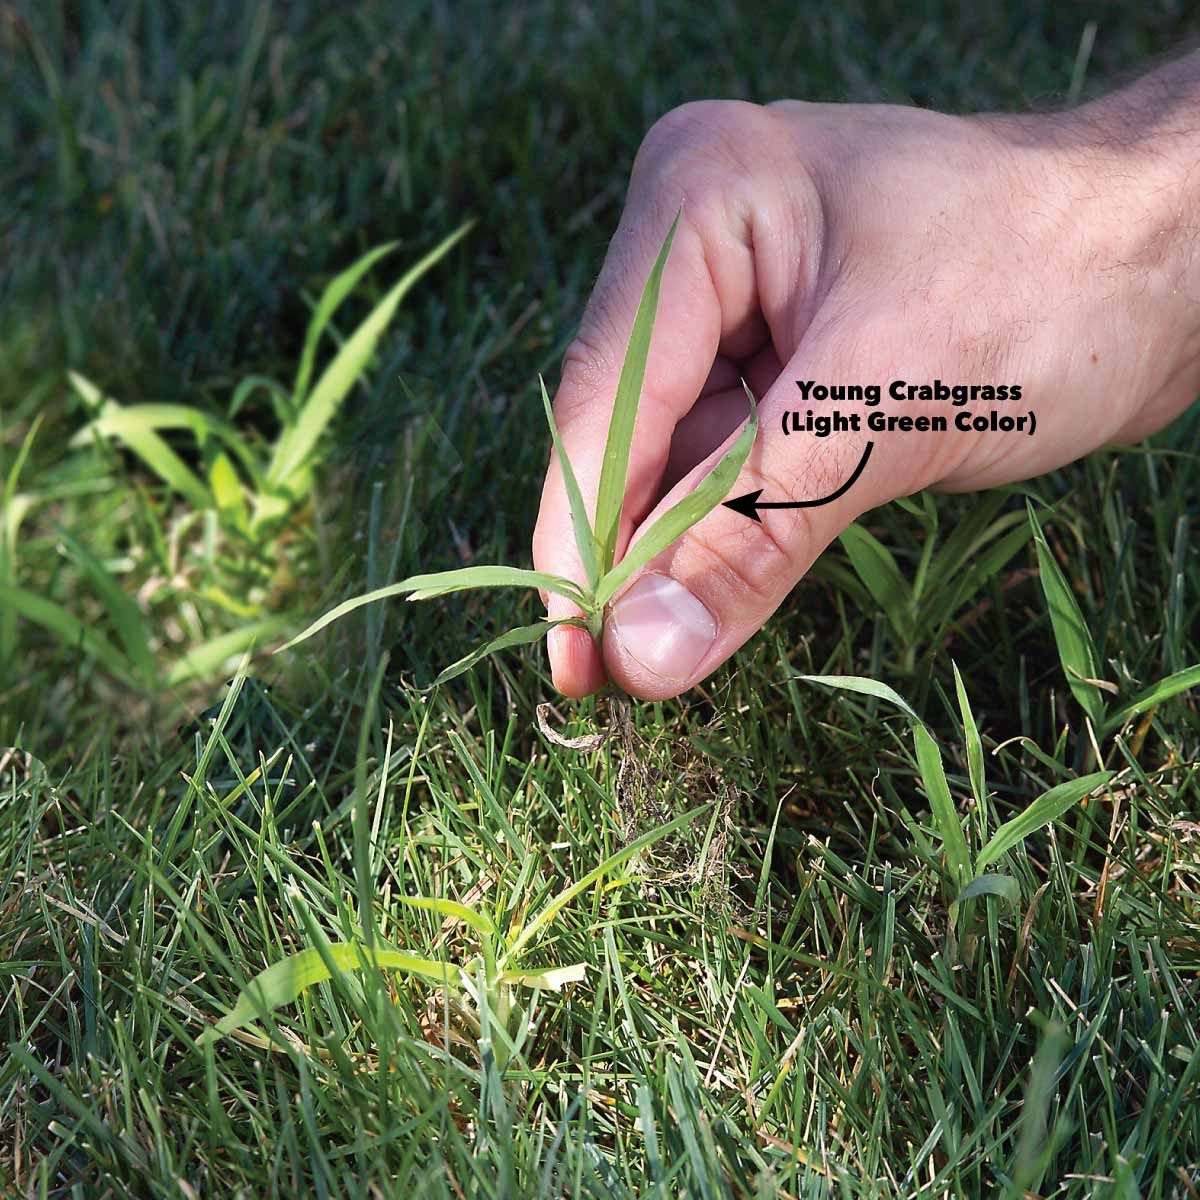 13 Tips for Getting Rid of Crabgrass for Good